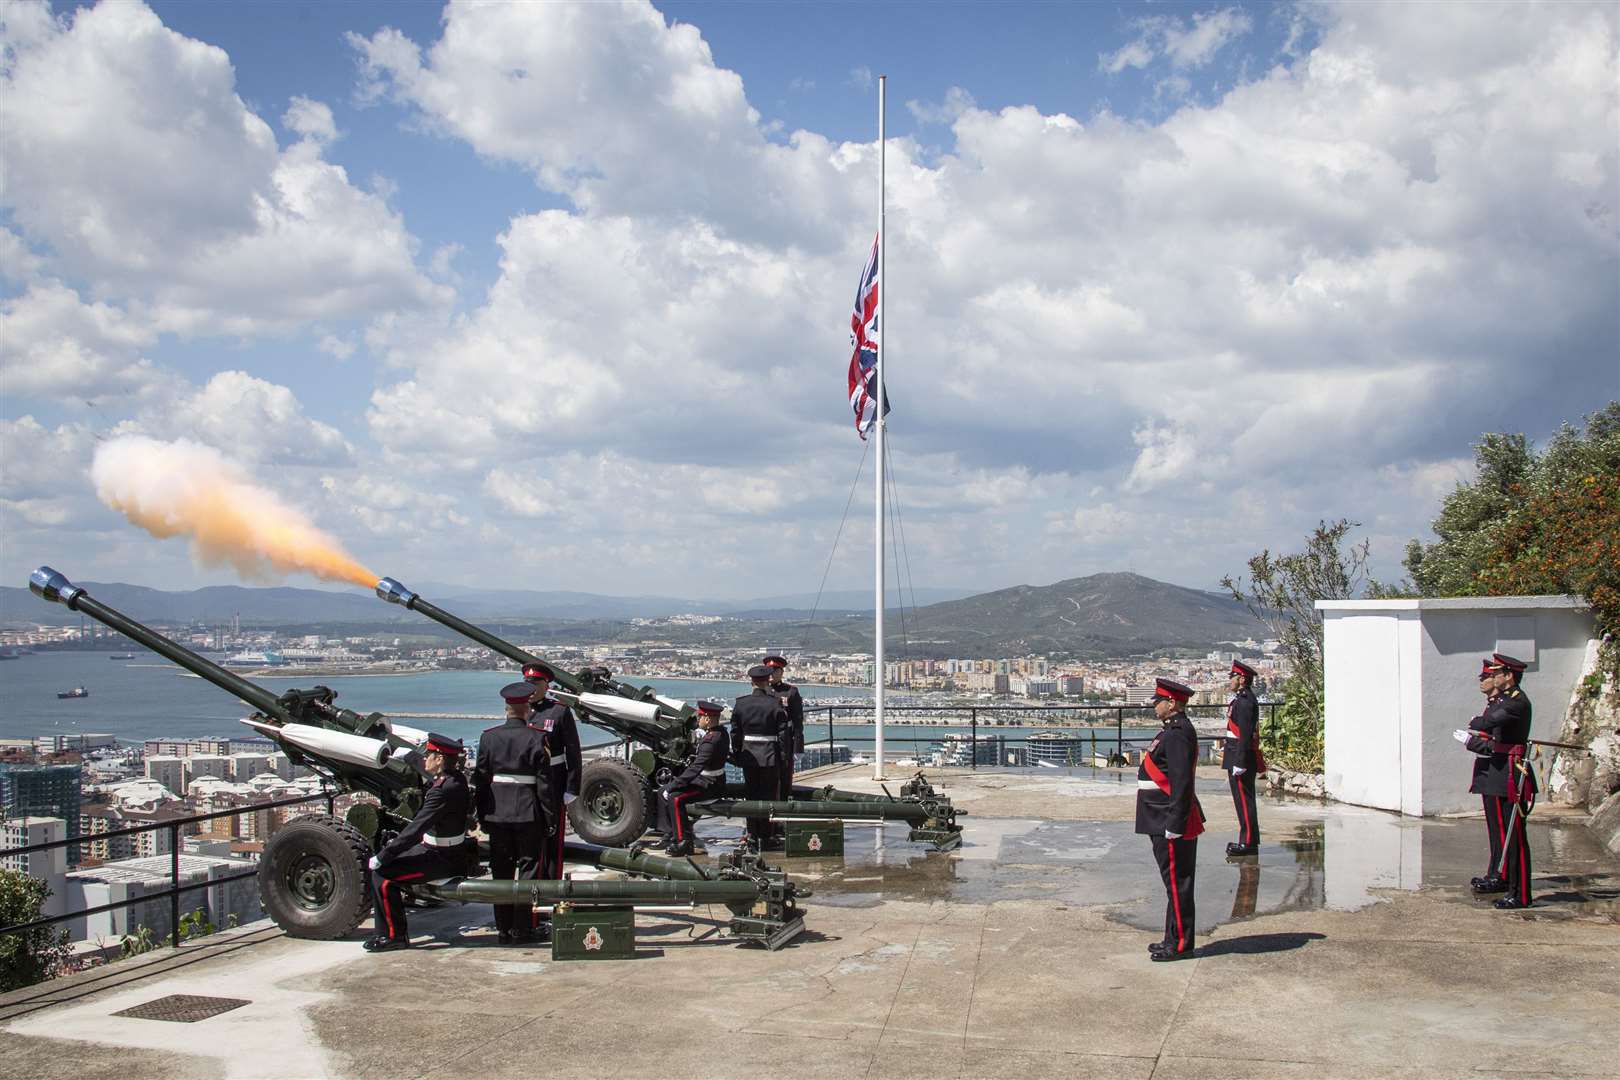 Personnel from the military conducting a gun salute in Gibraltar, to mark the national minute’s silence (Cpl Connor Payne RAF/MoD)